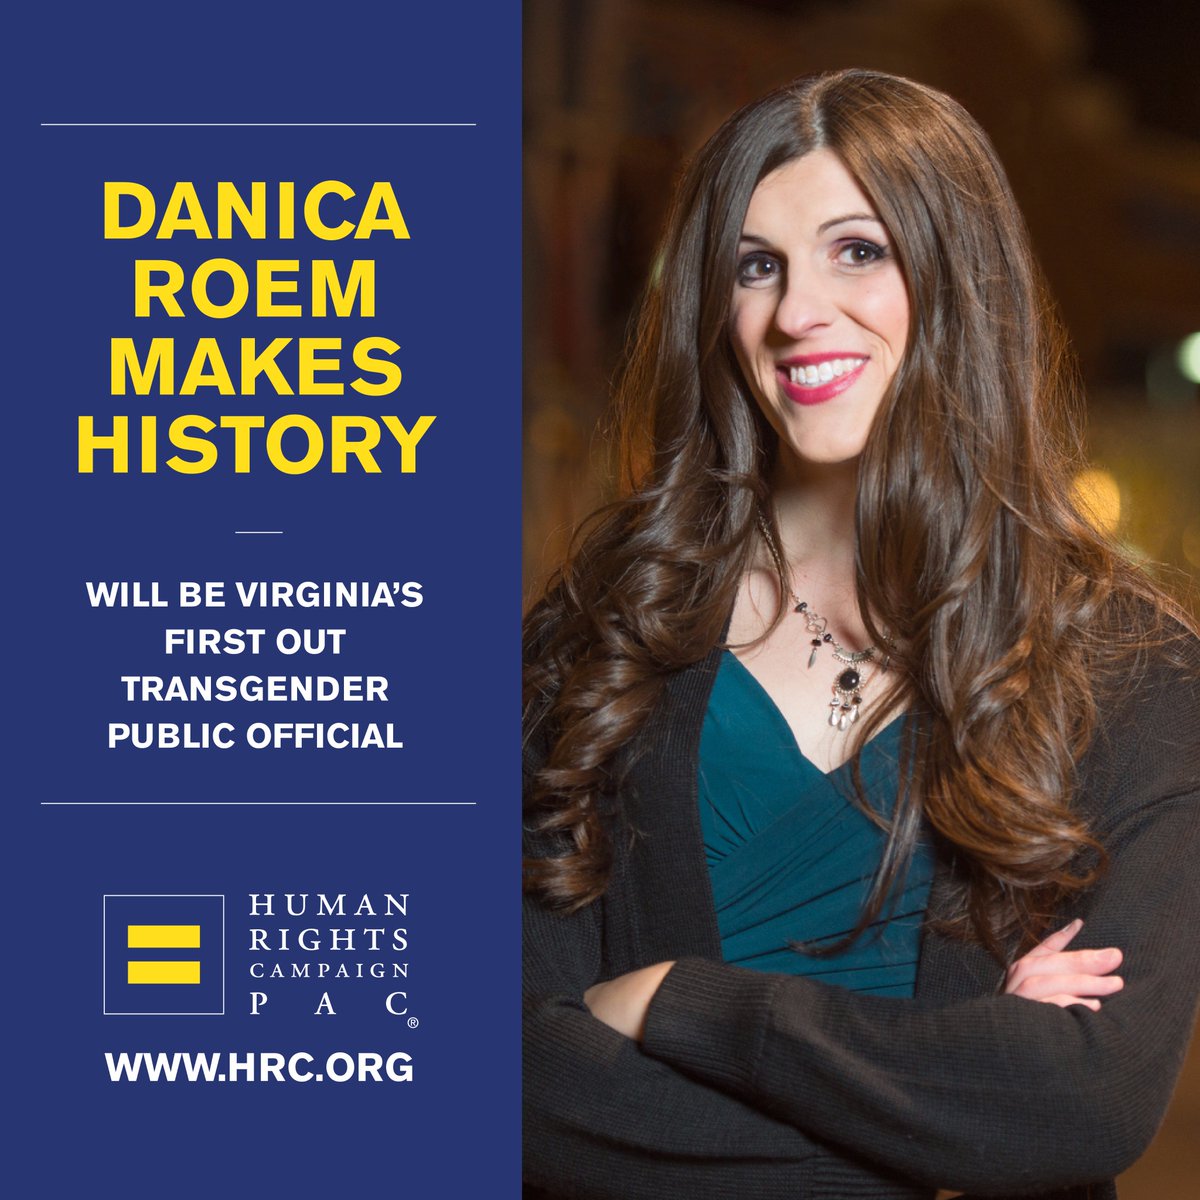 BREAKING: Danica Roem (@pwcdanica) makes history as #Virginia’s first out #transgender public official! #VaPol hrc.org/blog/danica-ro…